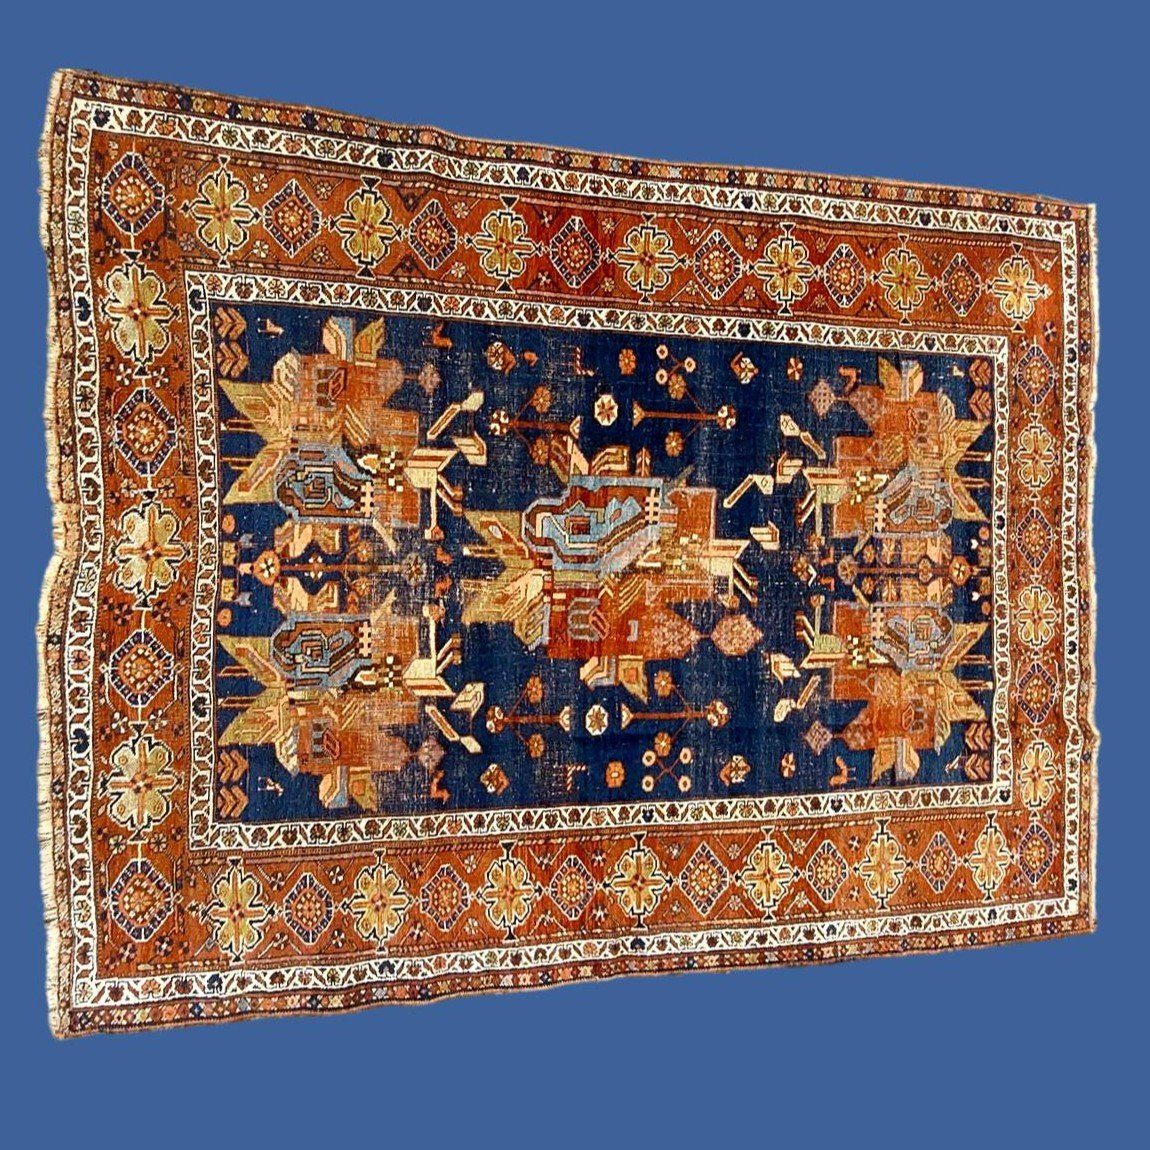 Old Afshar Rug, 149 Cm X 195 Cm, Hand-knotted Wool On Wool, Iran, Persia Circa 1900-photo-2